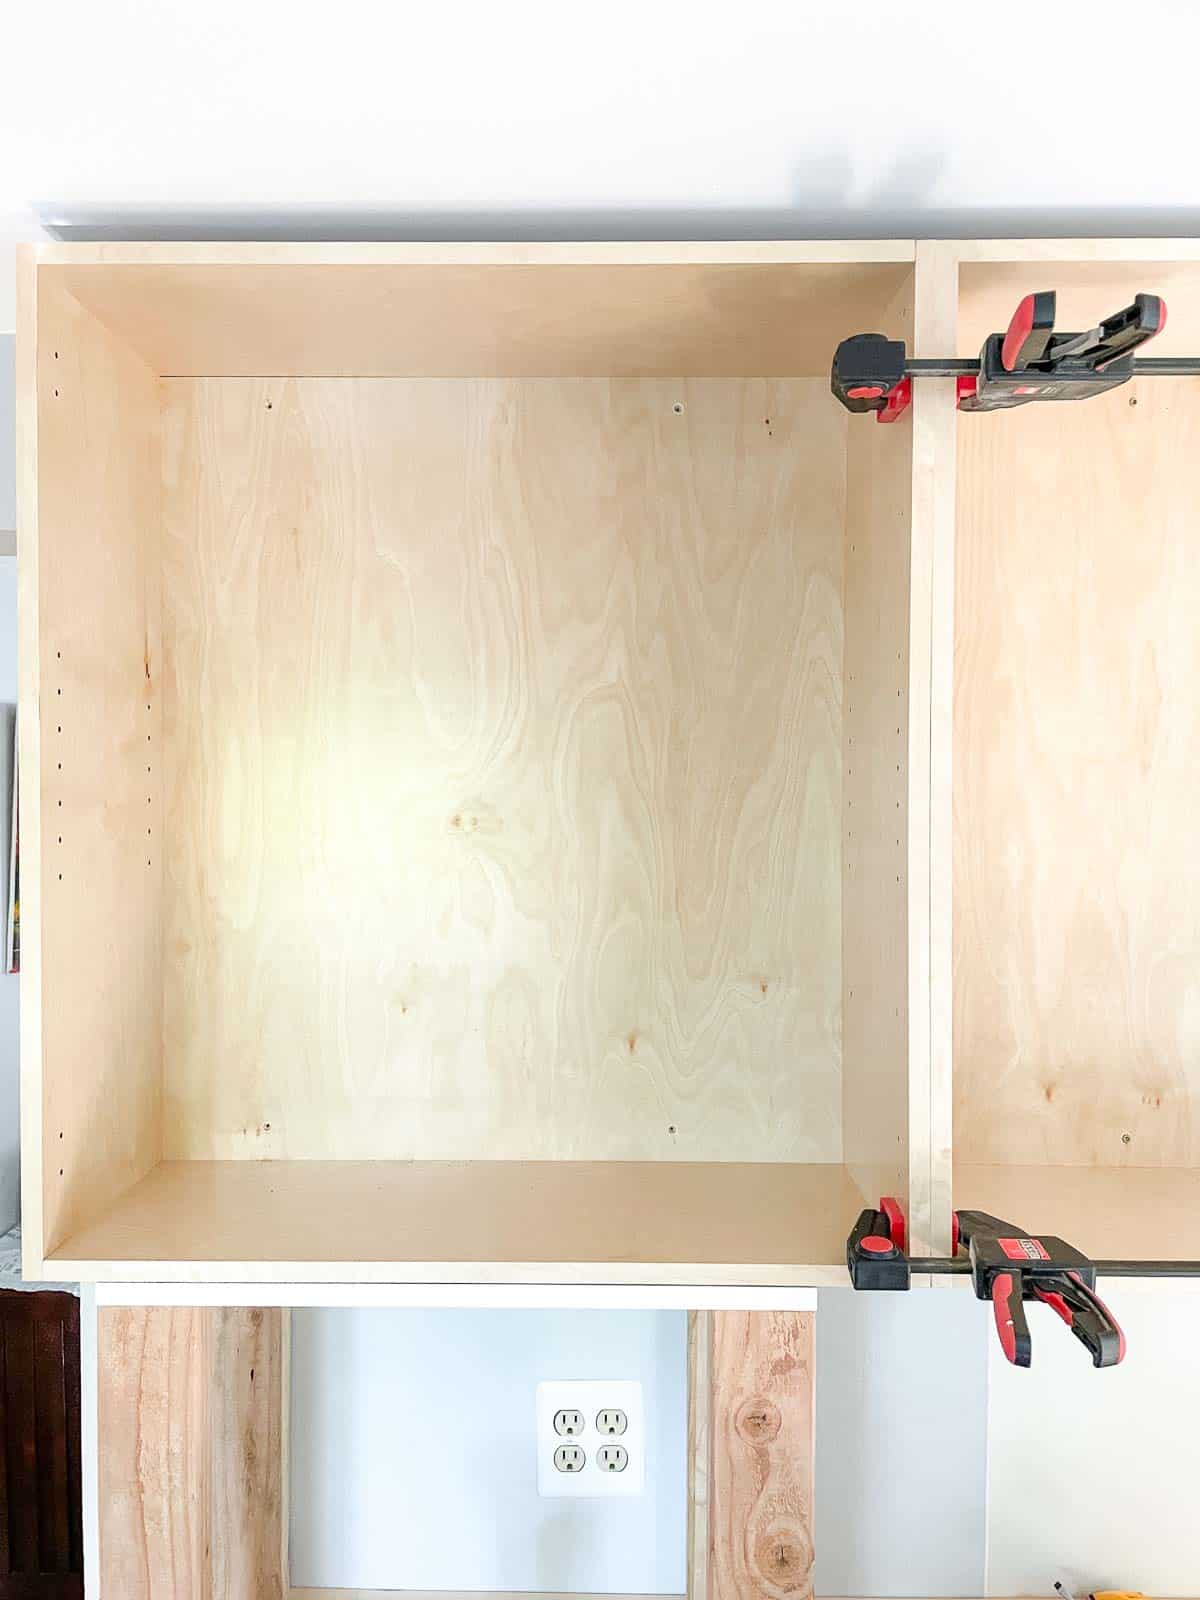 adjacent wall cabinet clamped to middle cabinet while propped up on platform